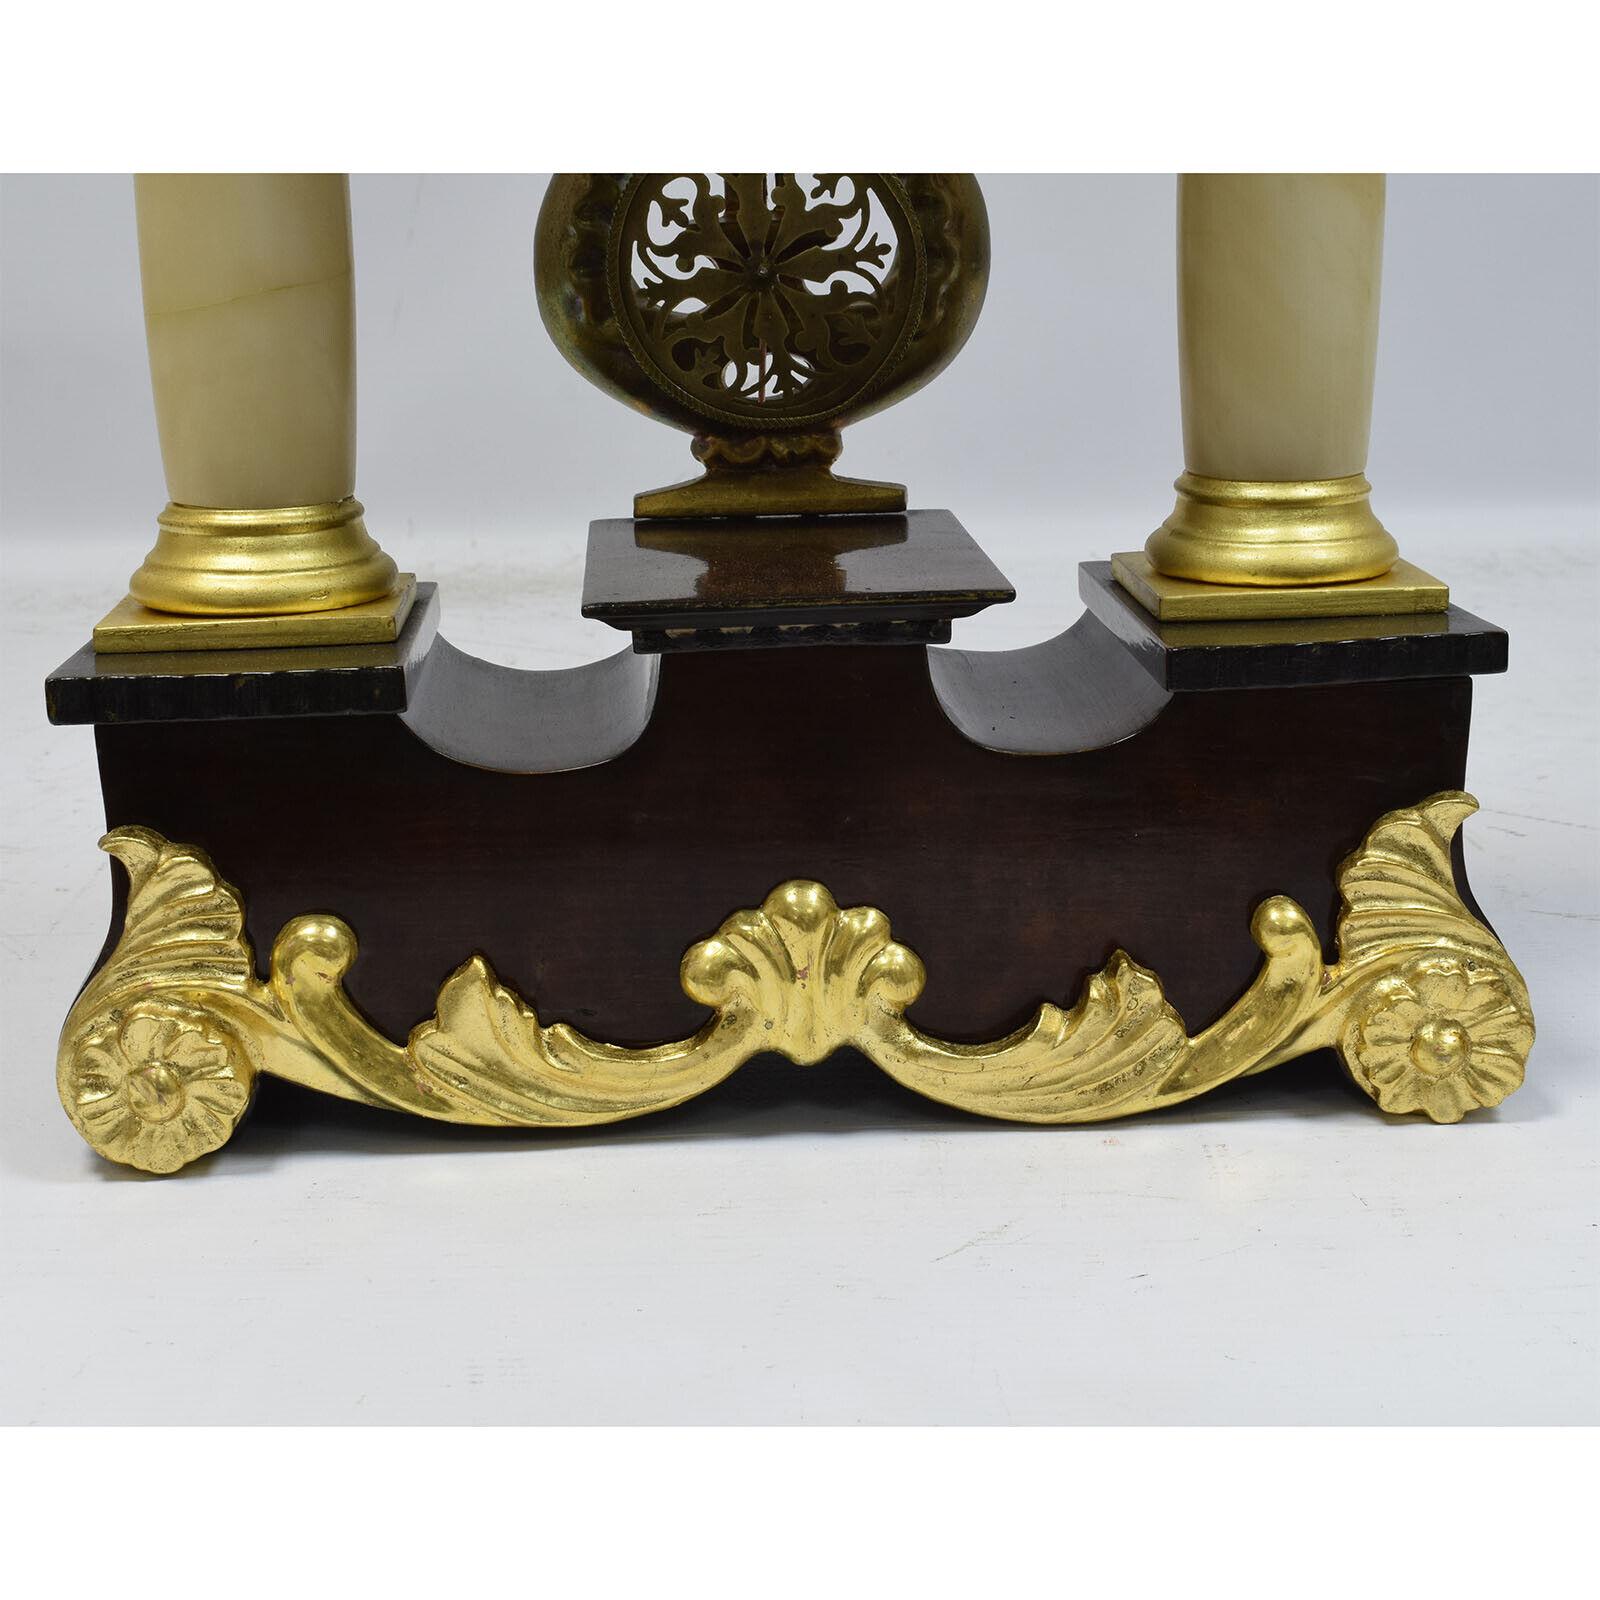 19th Century Functional Column Clock, Antique Mantel Clock with Portico, 1G03 For Sale 5